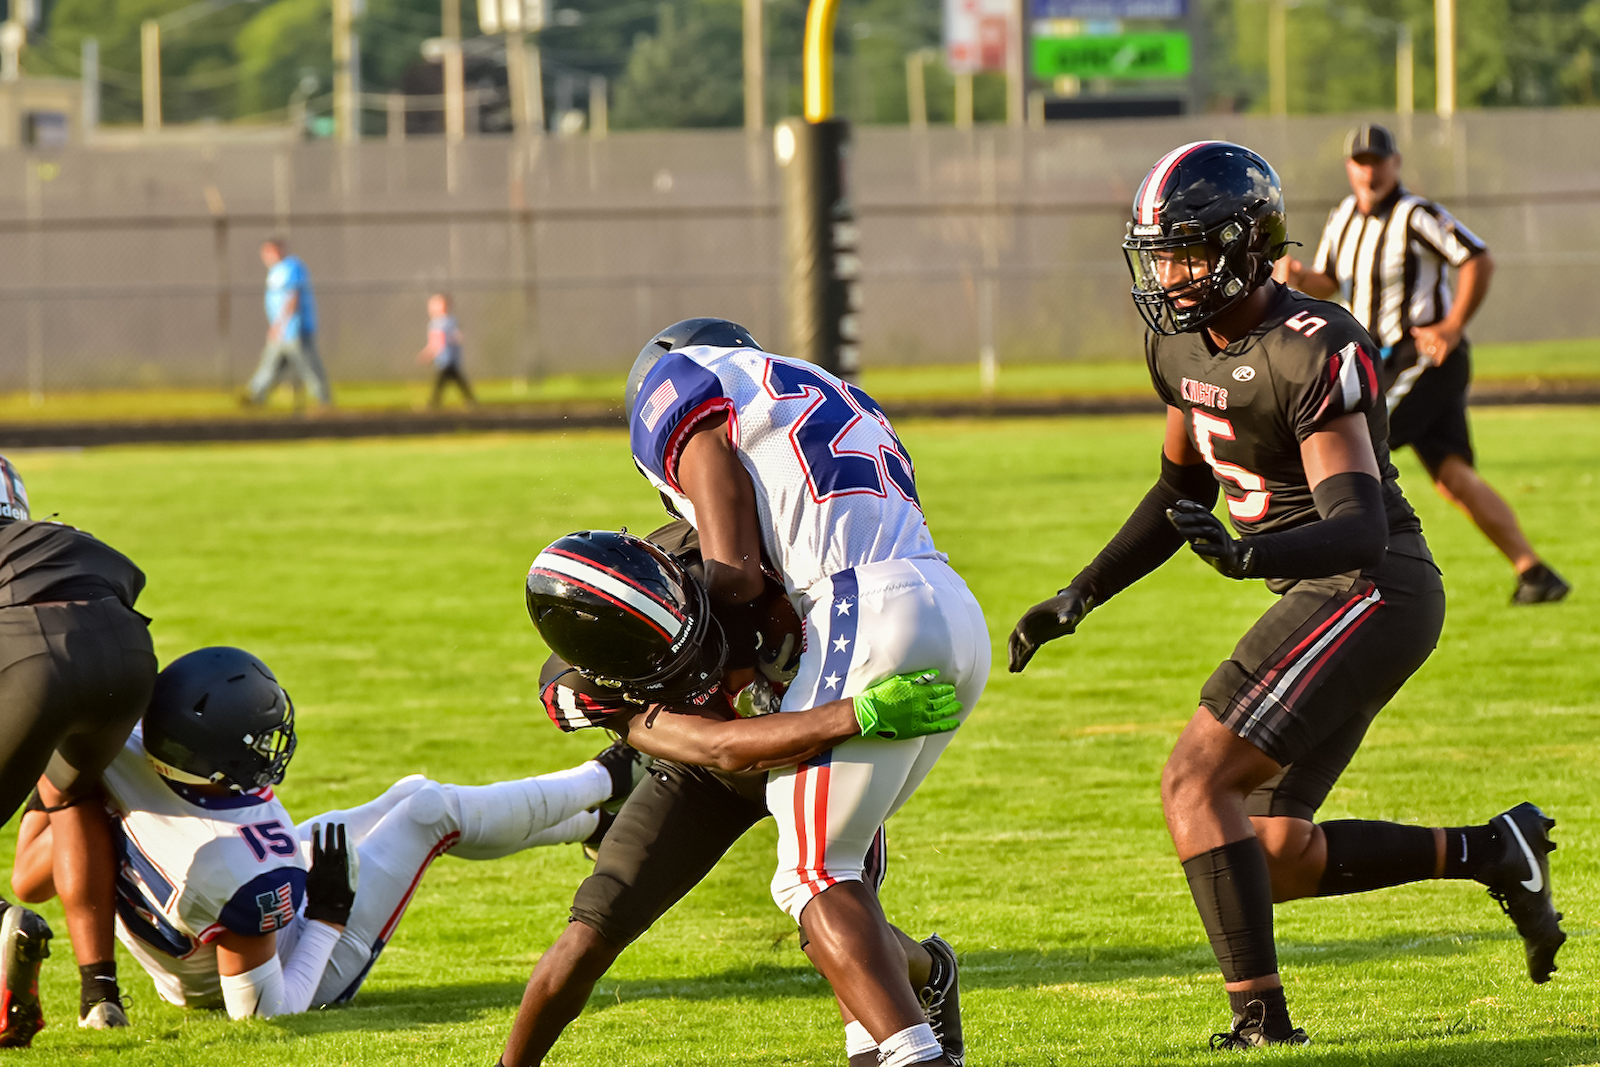 Football: Scrimmage vs. Heritage gallery cover photo